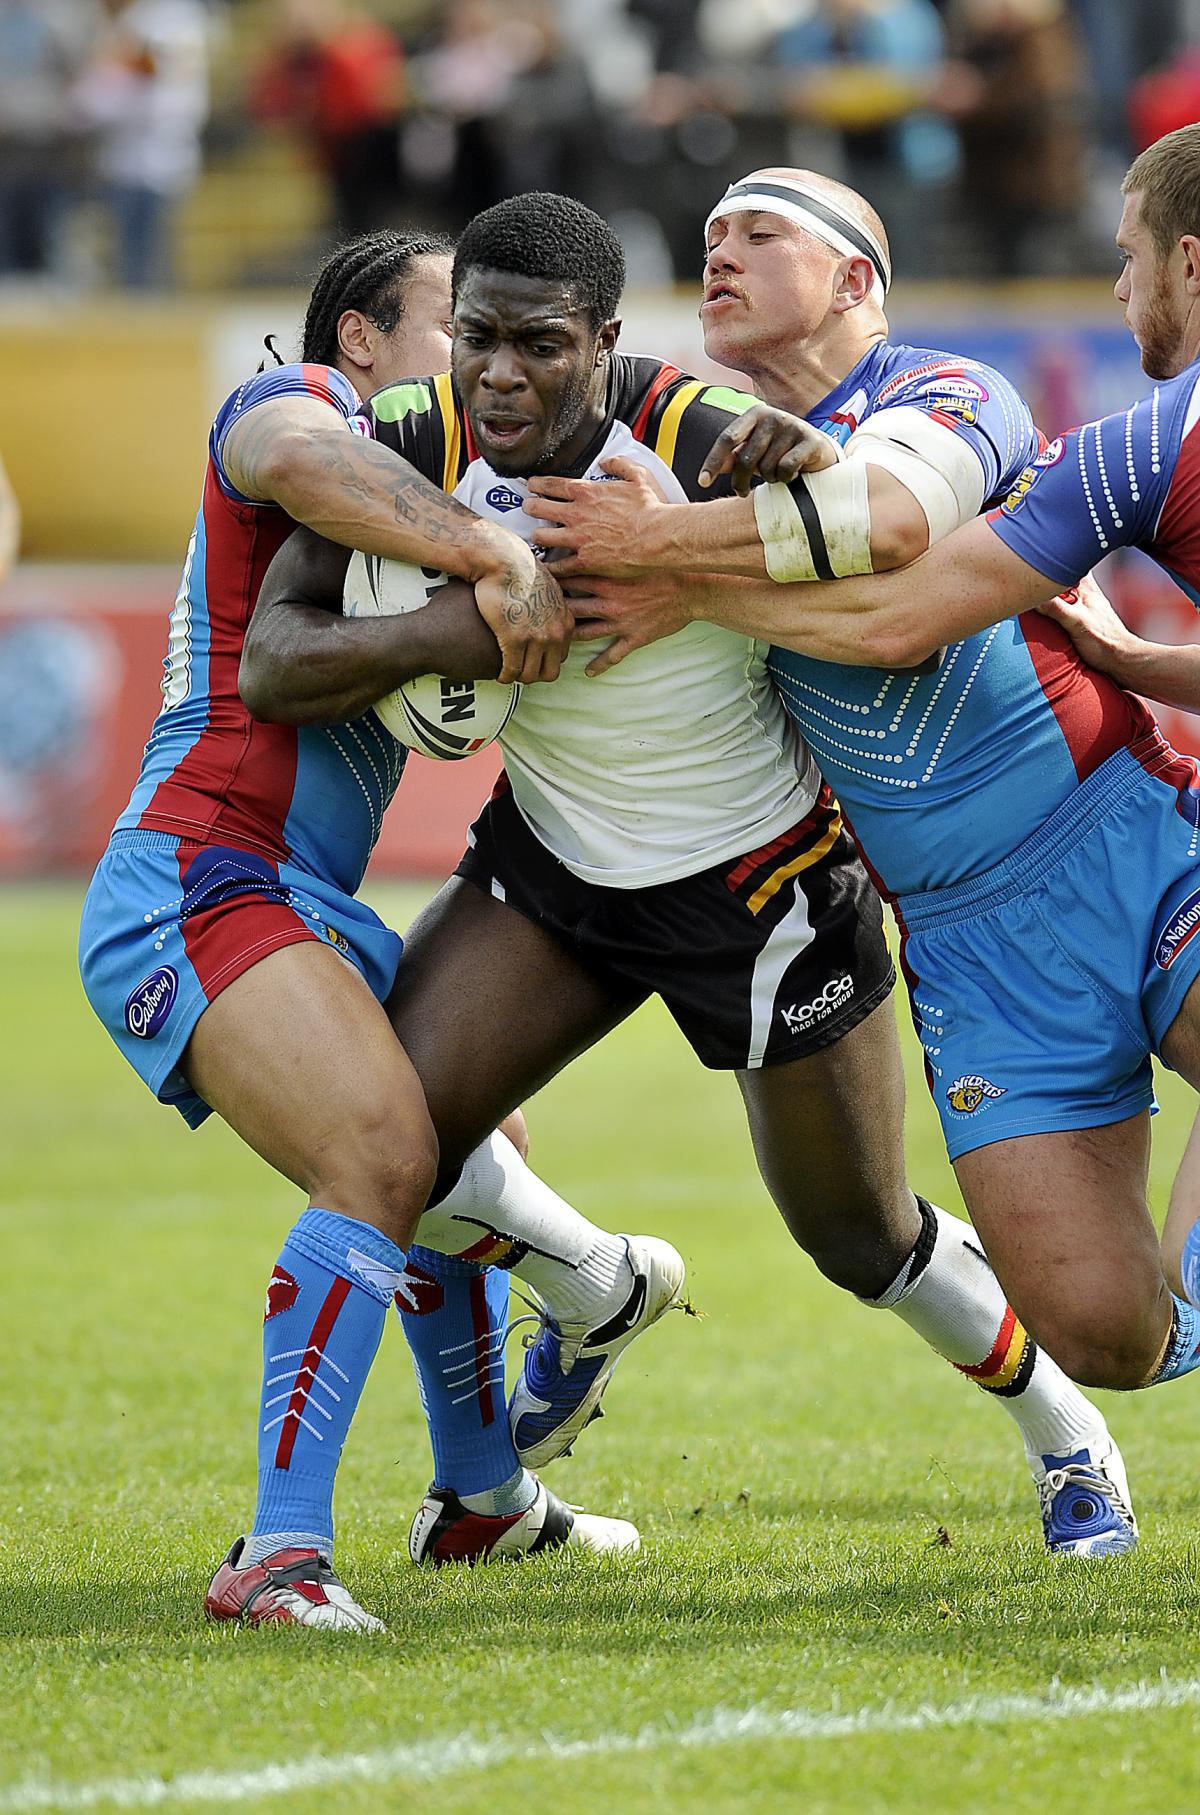 Match pictures from Bulls' game against Wakefield Wildcats